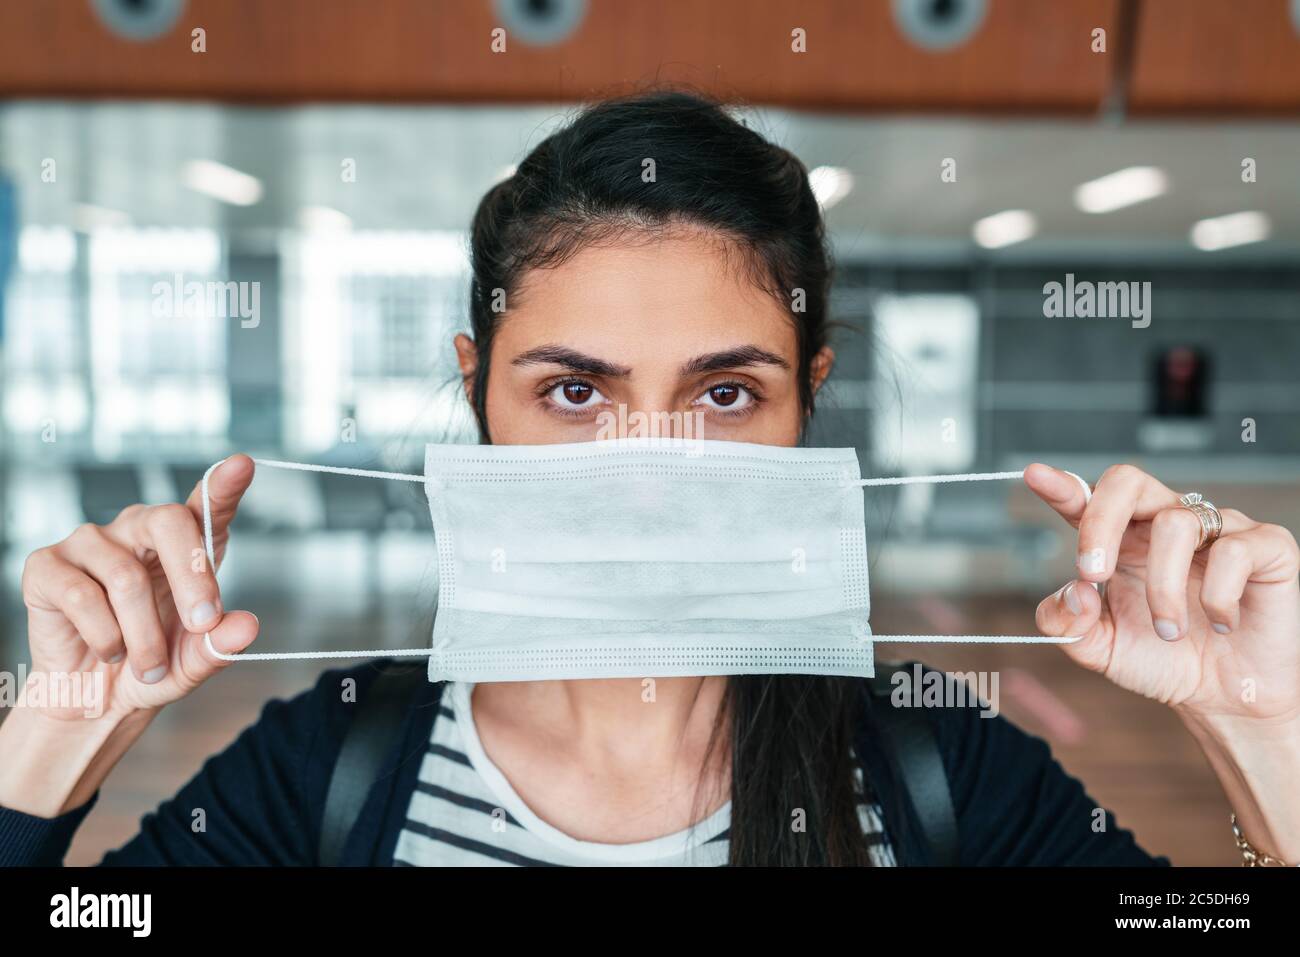 Young woman with a surgery mask, protection and precaution for contagious disease. Corona virus outbreaking. High quality photo Stock Photo